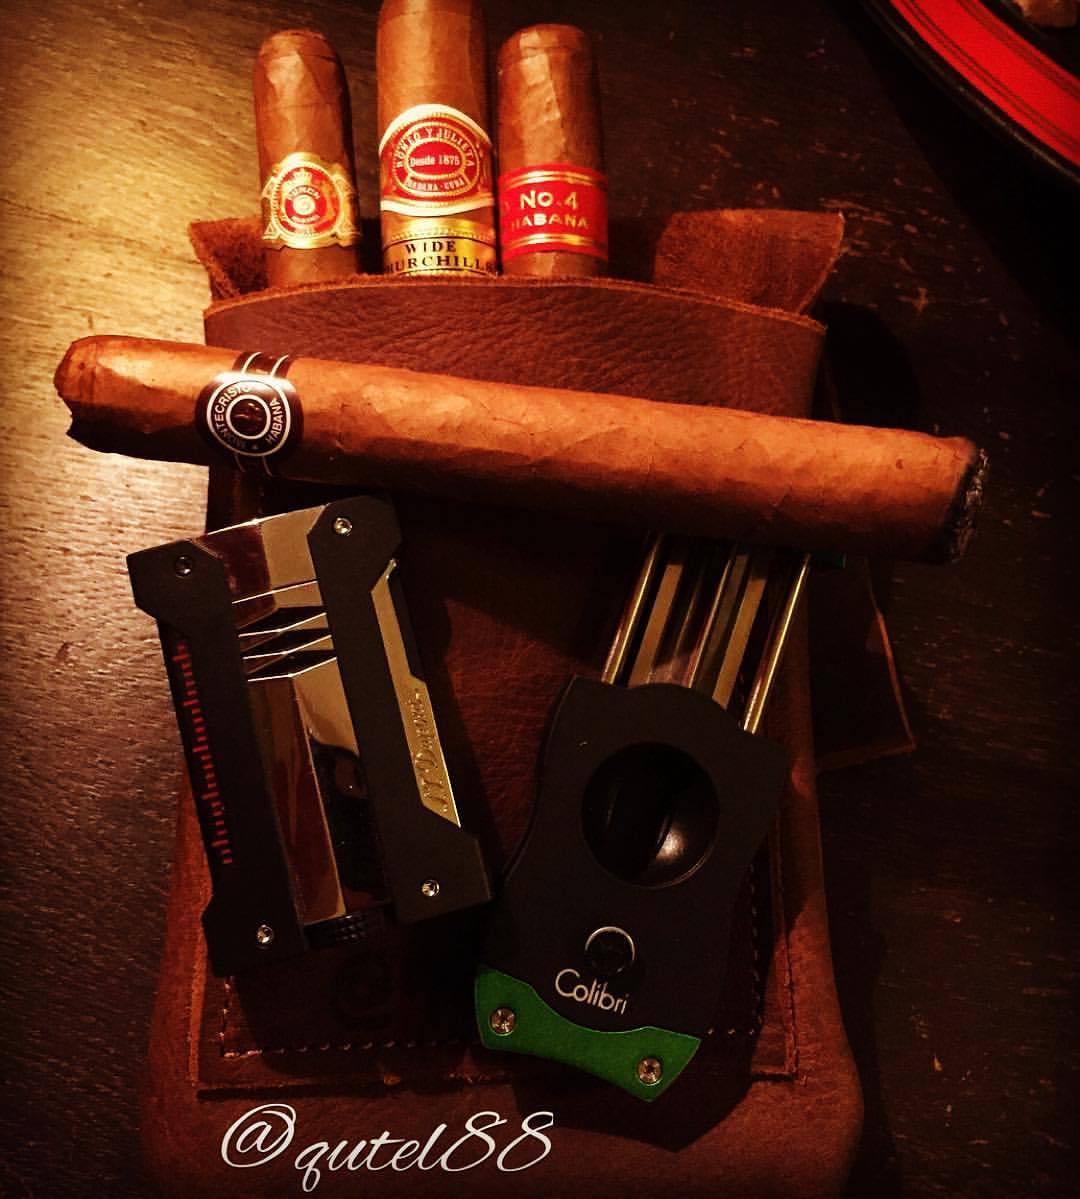 Cigar leather pic from Roy @qutel88 Smoking a great Montecristo Double Edmundo with @frenchcigars at the van Lookeren lounge #cigar #cigars #nowsmoking www.LegendarySaxon.com